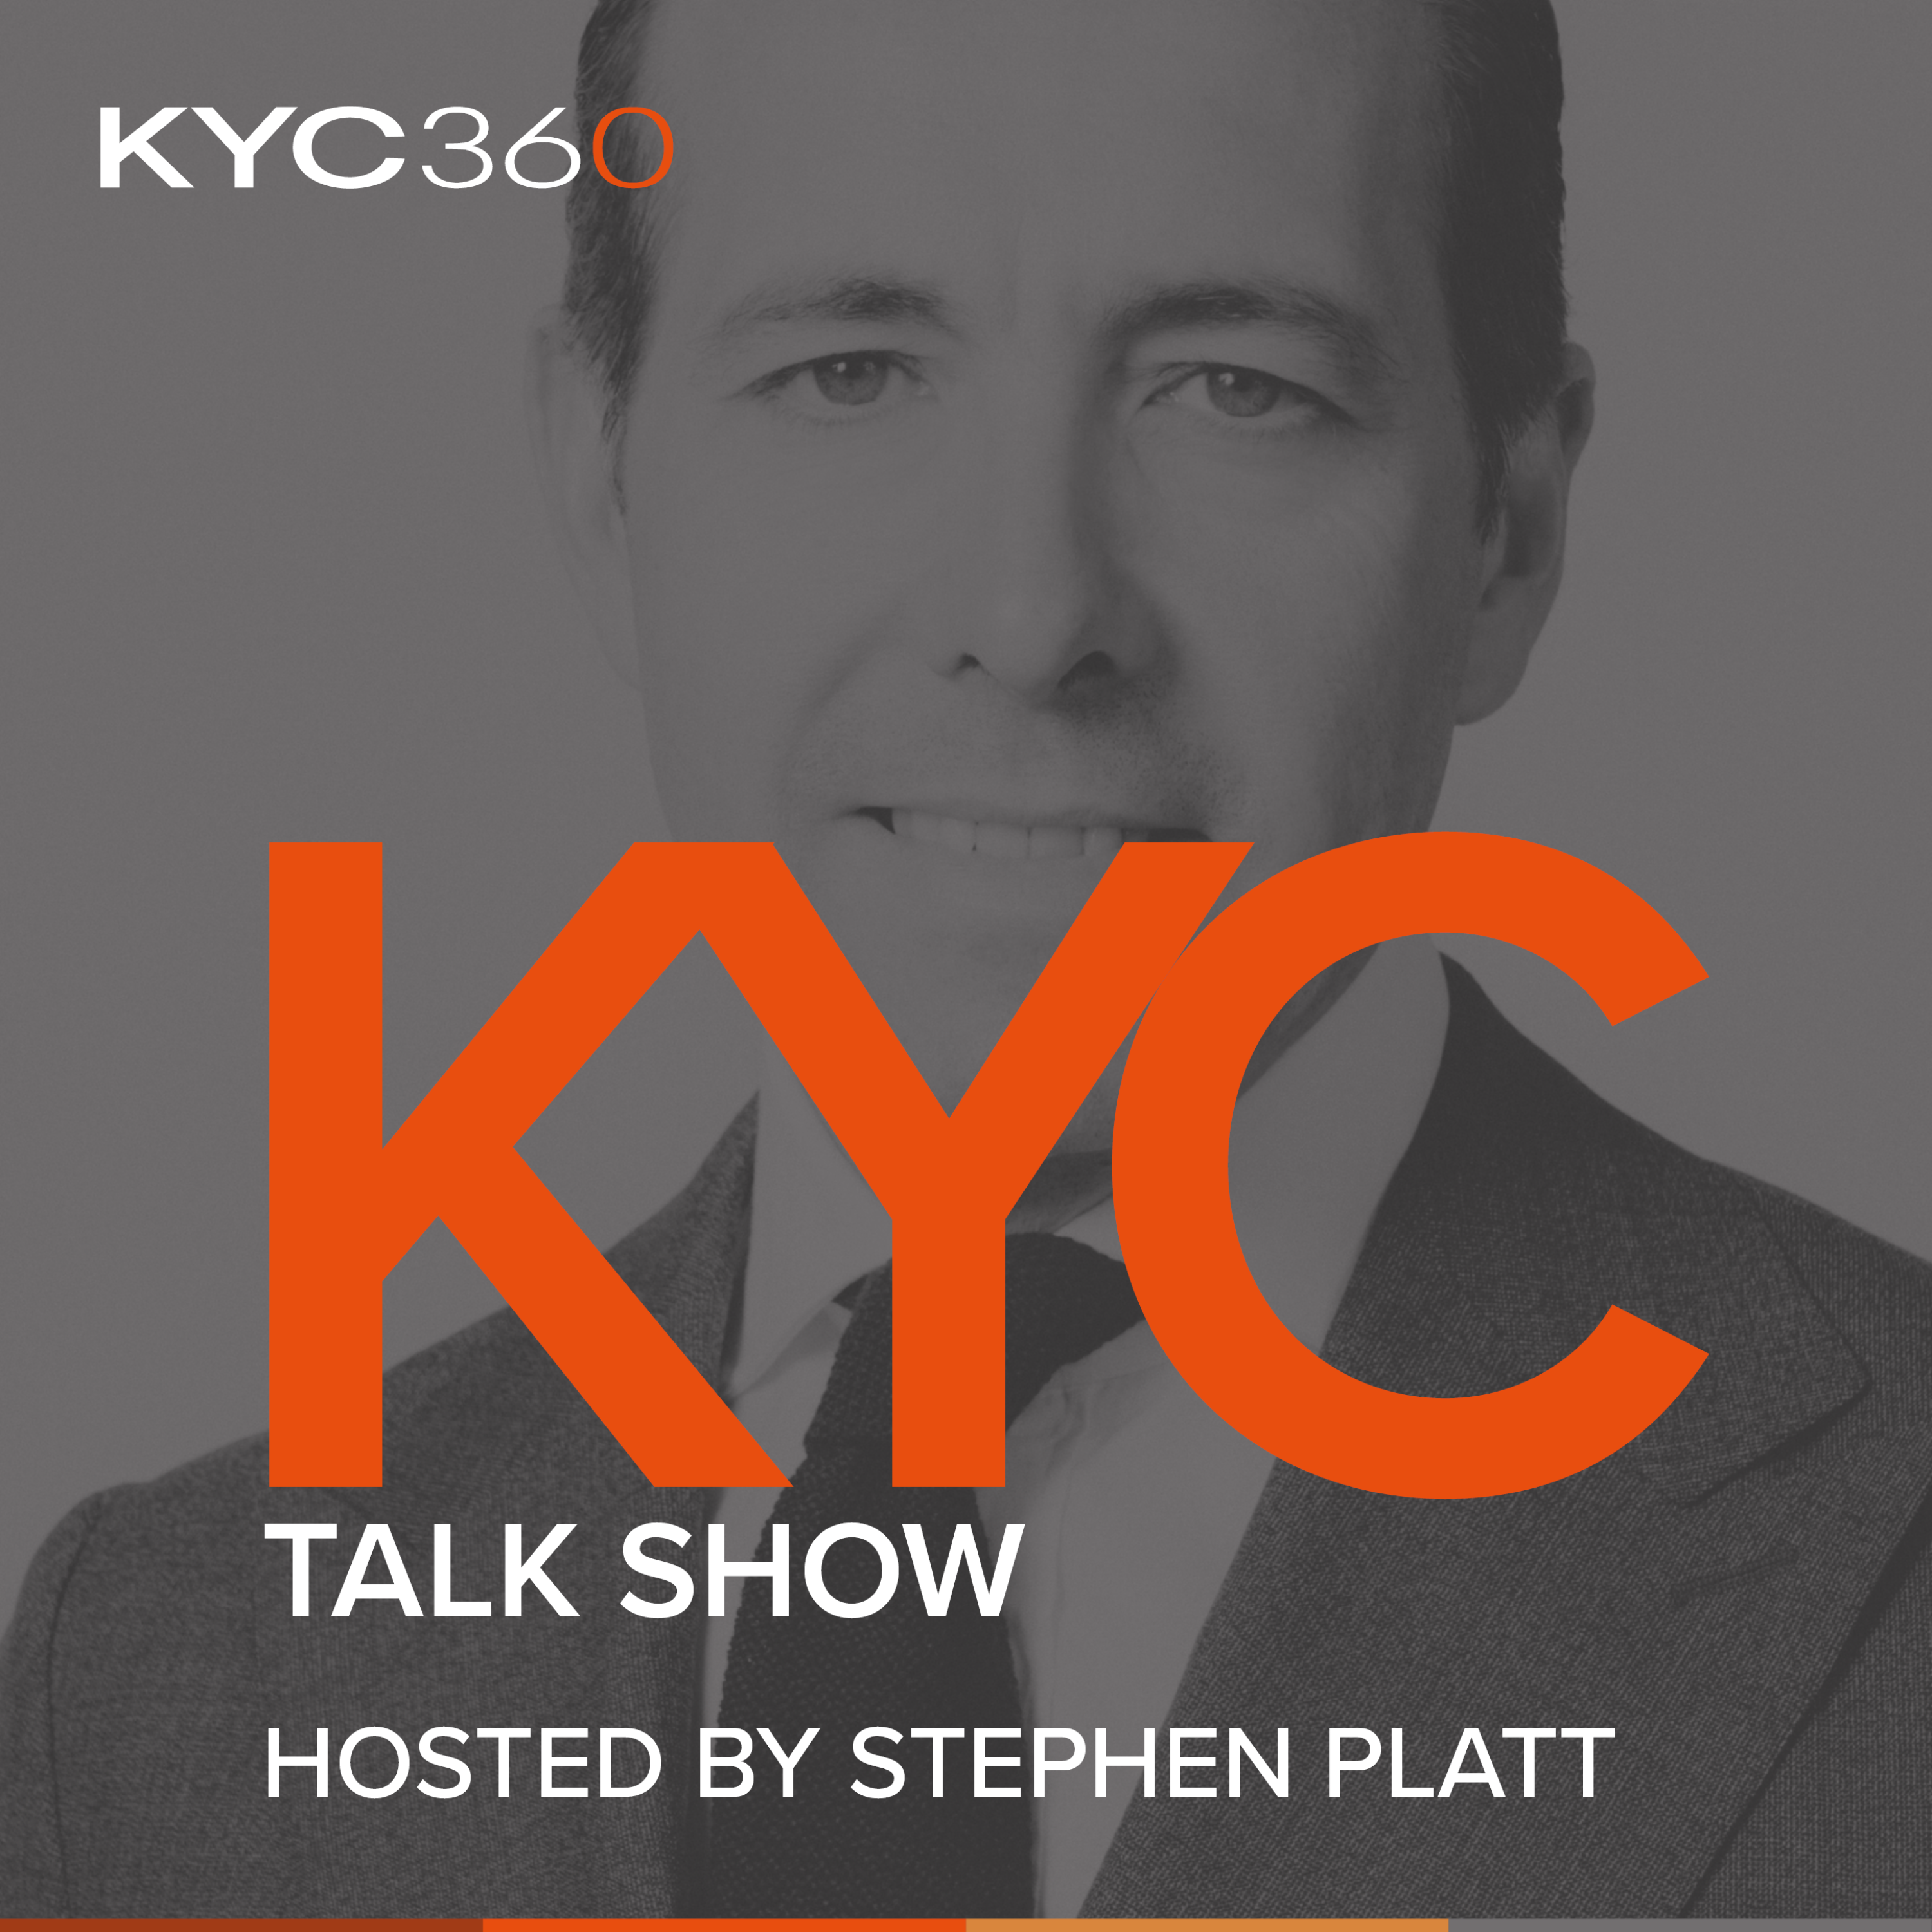 KYC Talk Show brought to you by KYC360.com, with host Stephen Platt